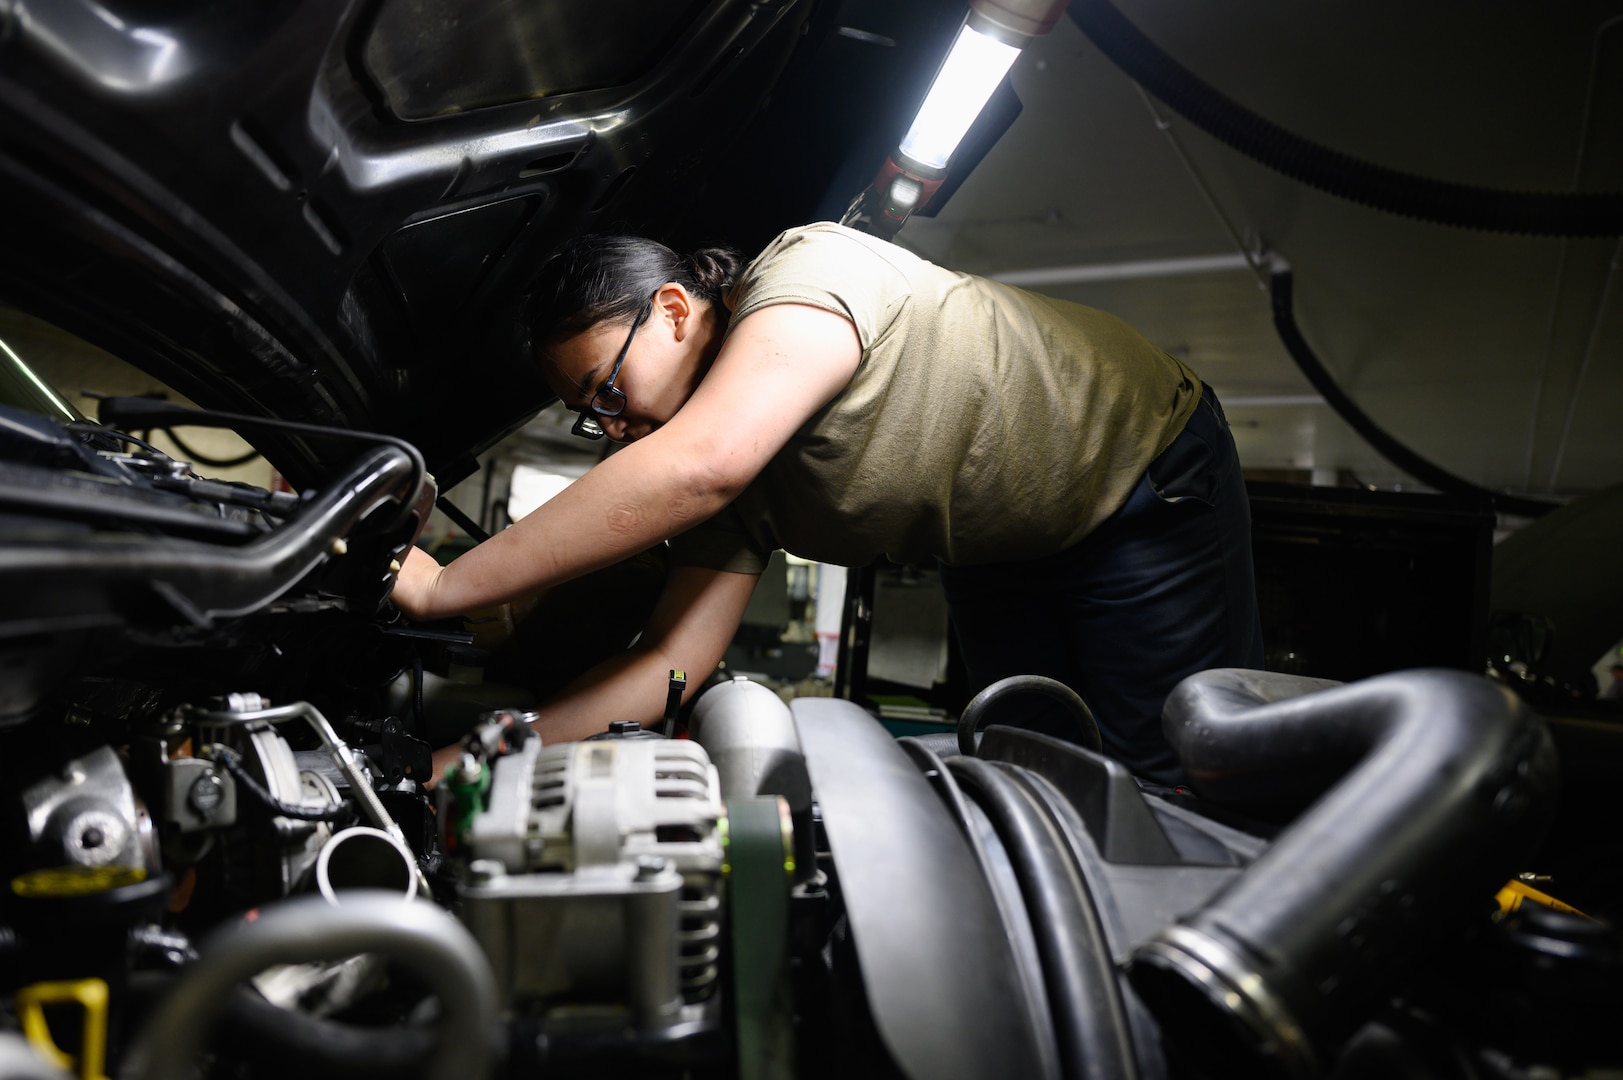 U.S. Air Force Airman 1st Class Azure Agricula-McCormick, a 354th Logistics Readiness Squadron vehicle maintenance journeyman, performs preventative maintenance on a vehicle during RED FLAG-Alaska 22-1 on Eielson Air Force Base, Alaska, May 11, 2022.